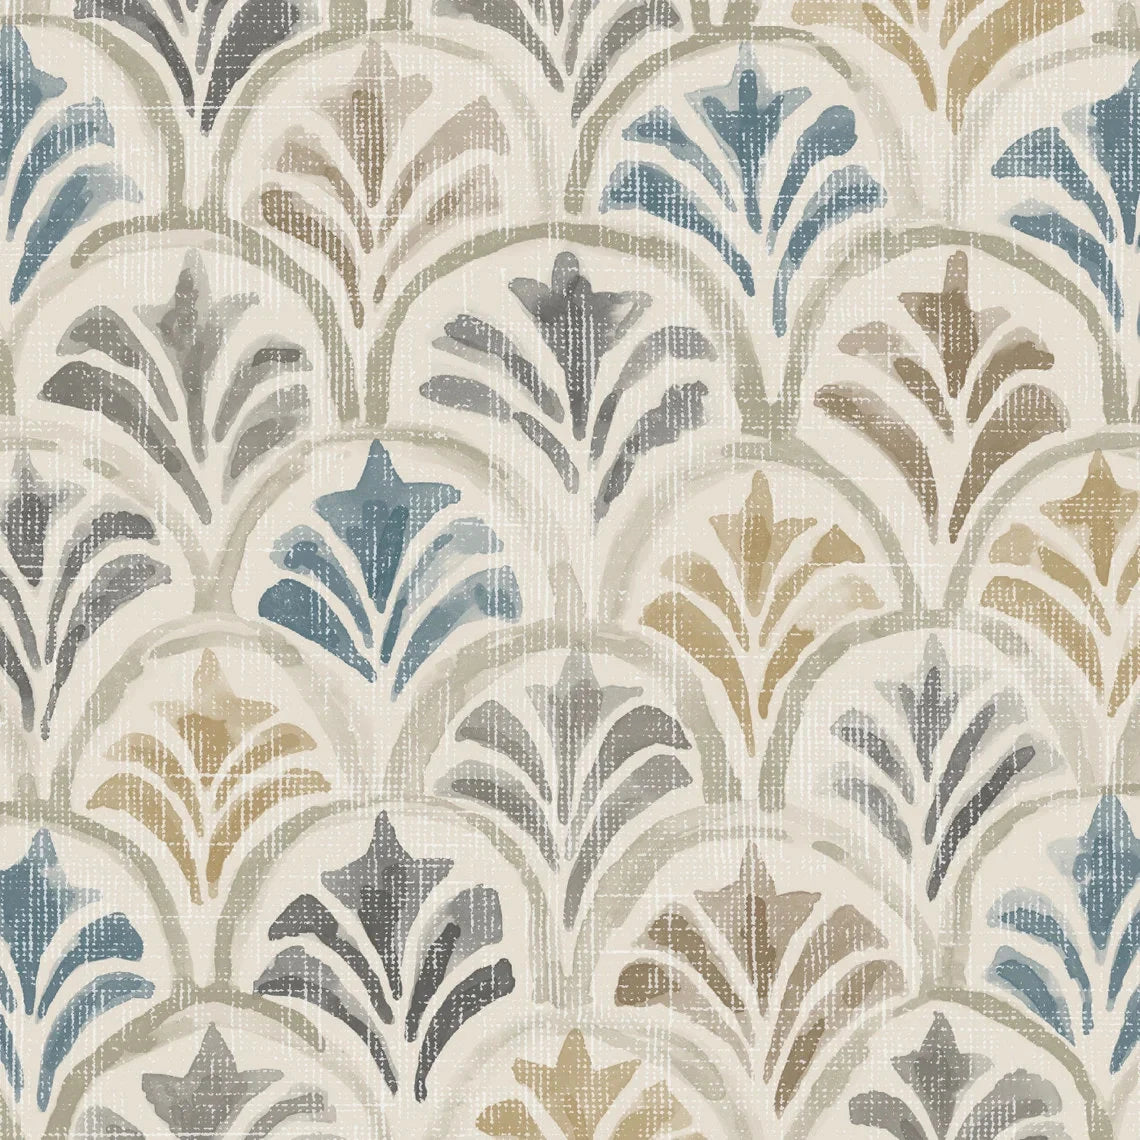 Bed Runner in Countess Harbor Blue Scallop Watercolor